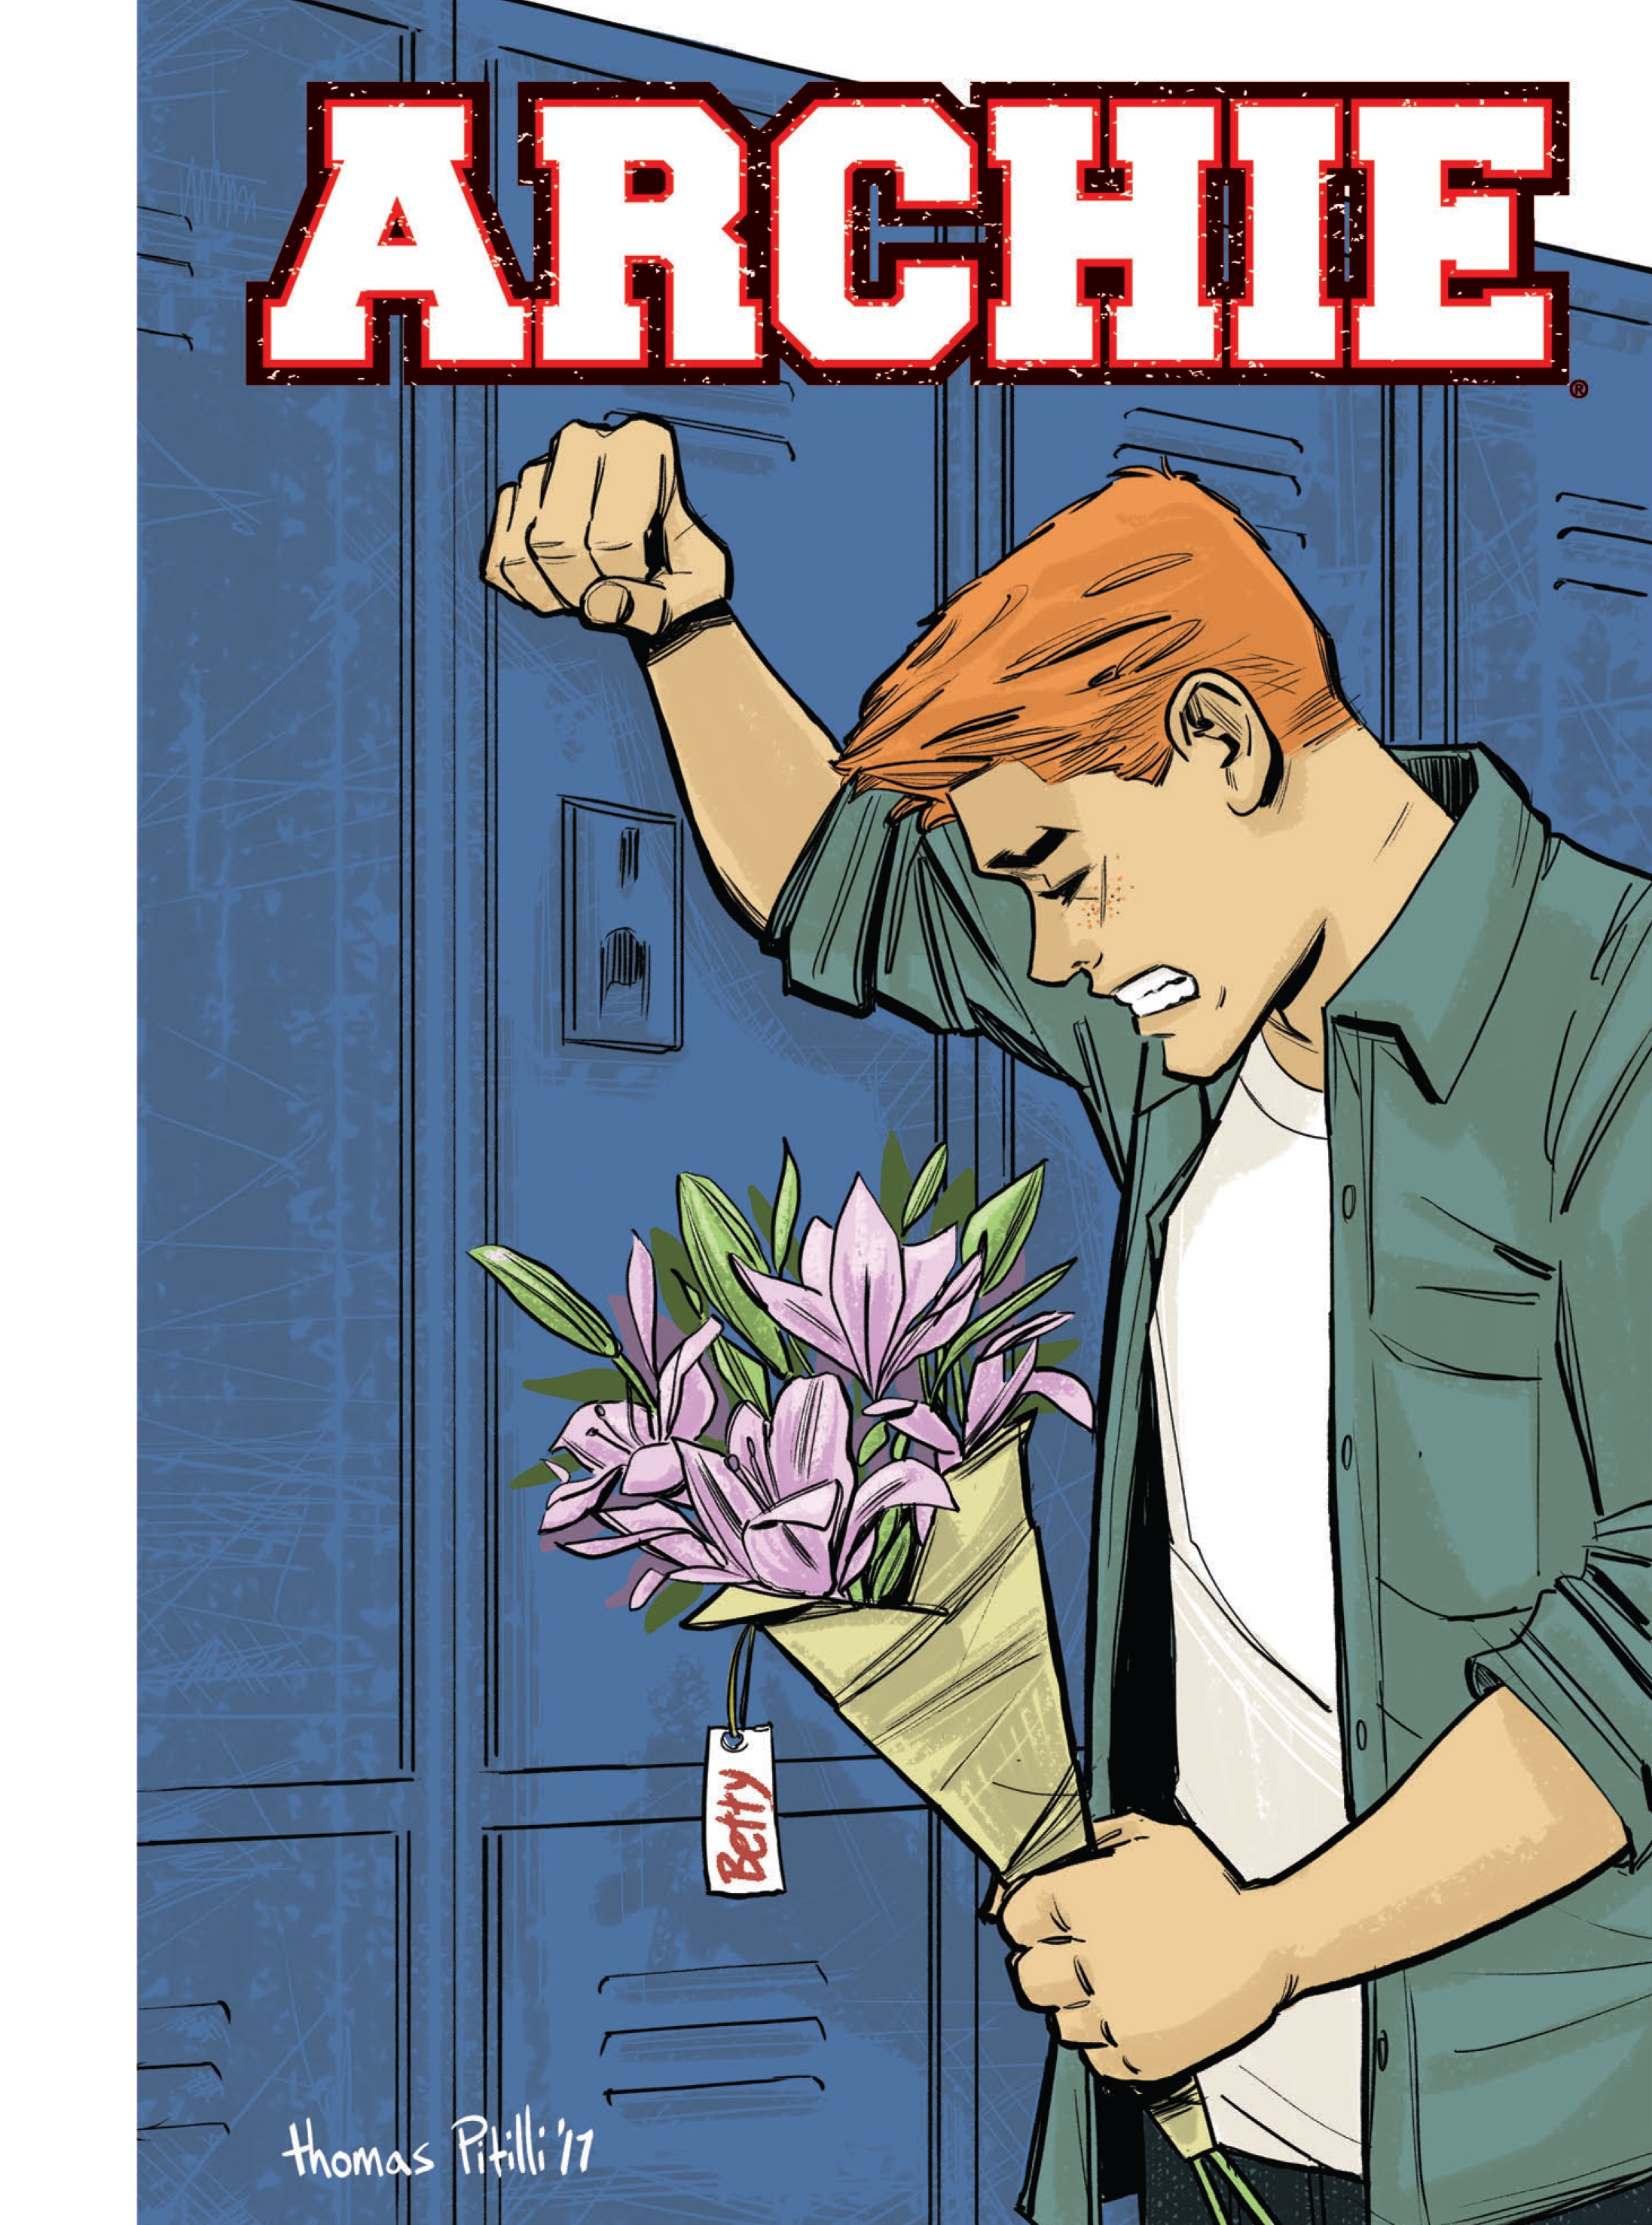 Read online Riverdale Digest comic -  Issue # TPB 6 - 15